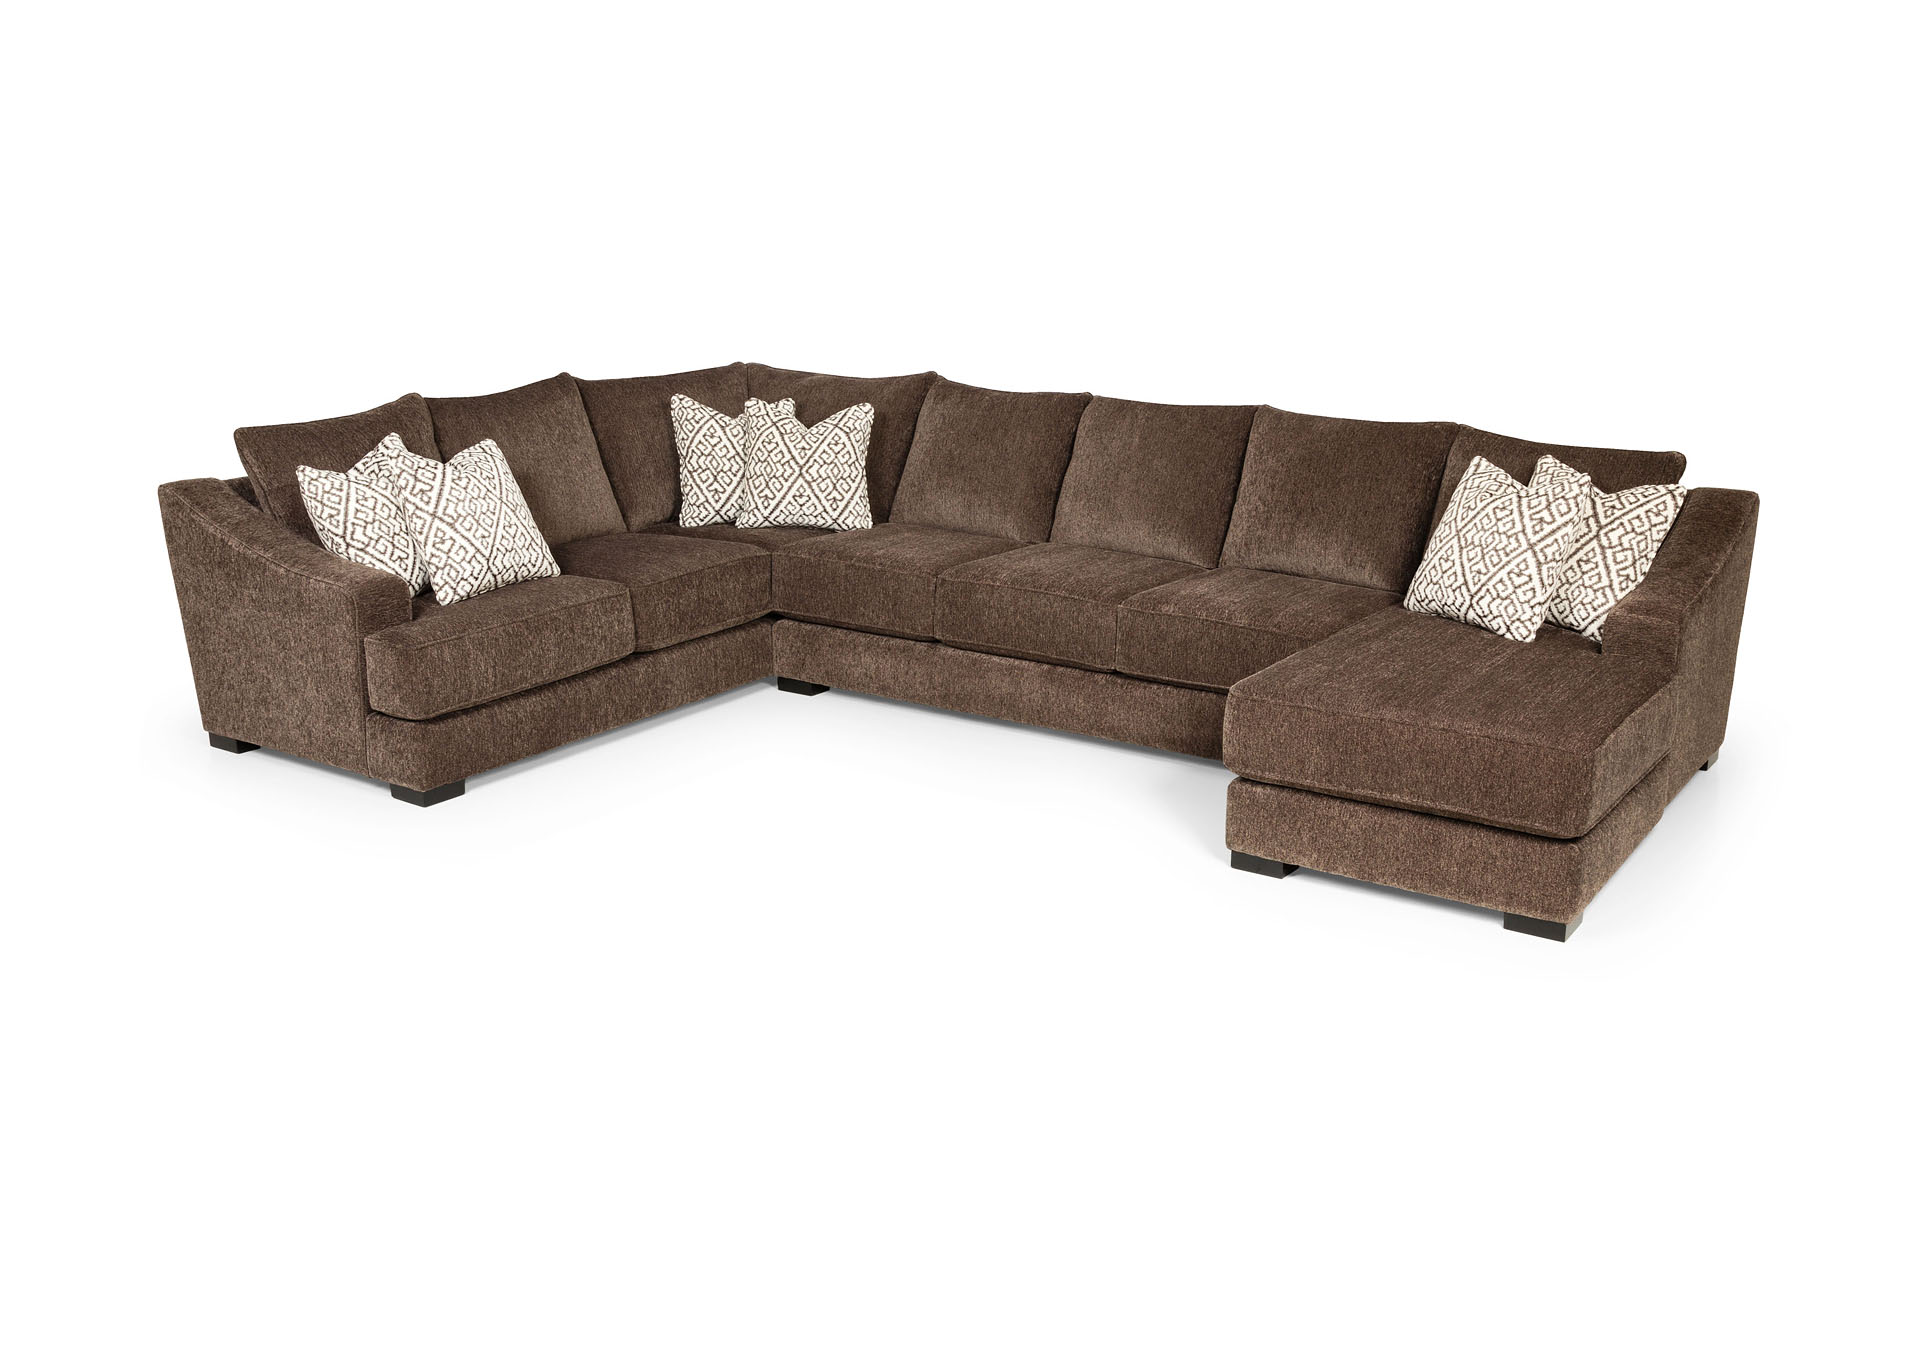 Lux Iron 3 Piece Sectional,Stanton